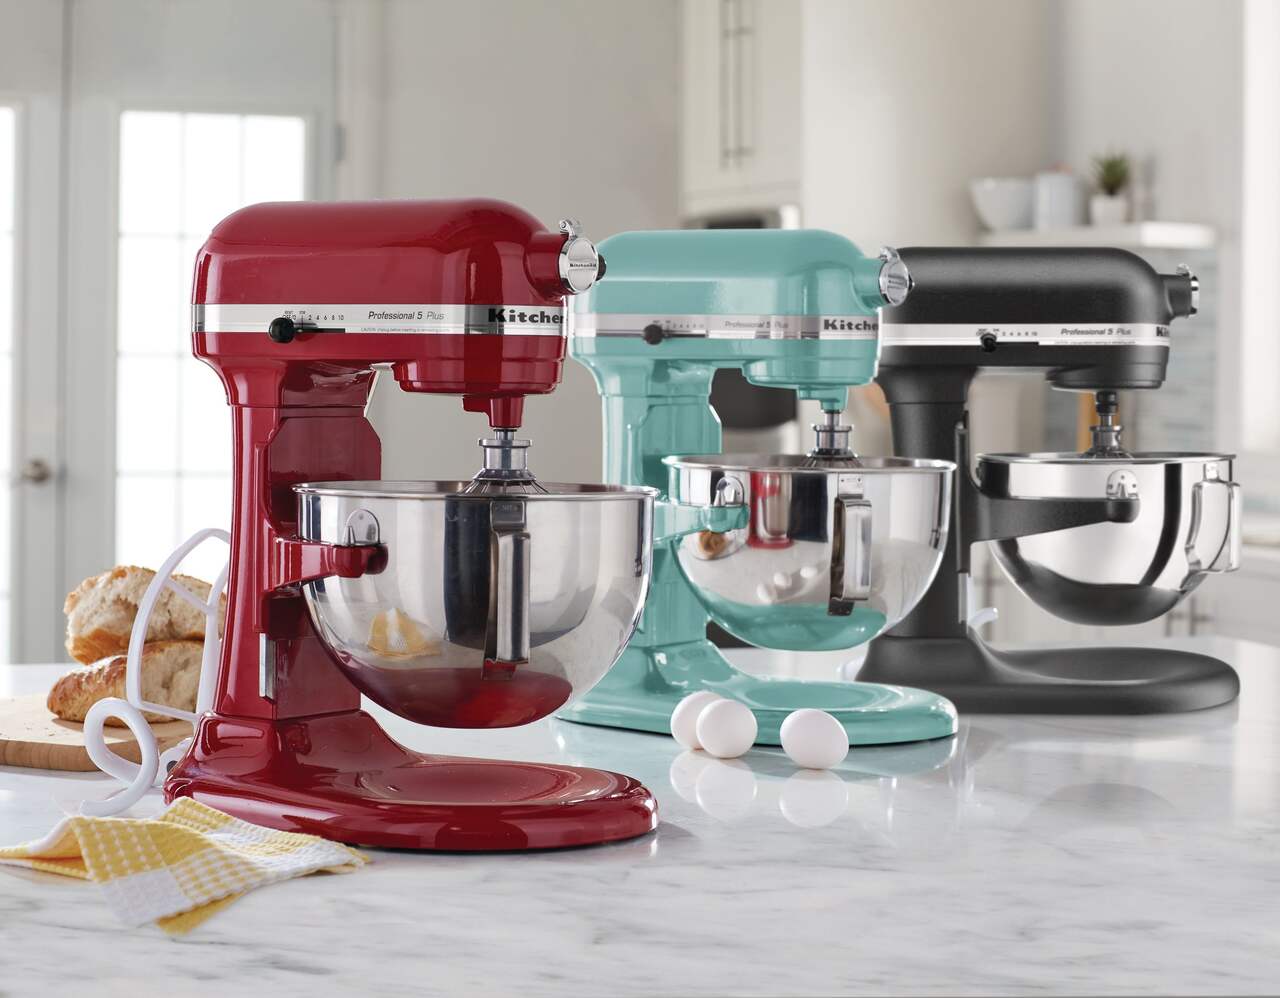 https://media-www.canadiantire.ca/product/living/kitchen/kitchen-appliances/0430688/kitchen-aid-empire-red-pro-5-plus-stand-mixer-e35c38f9-e285-4190-83d5-3ab438d5d78e-jpgrendition.jpg?imdensity=1&imwidth=1244&impolicy=mZoom